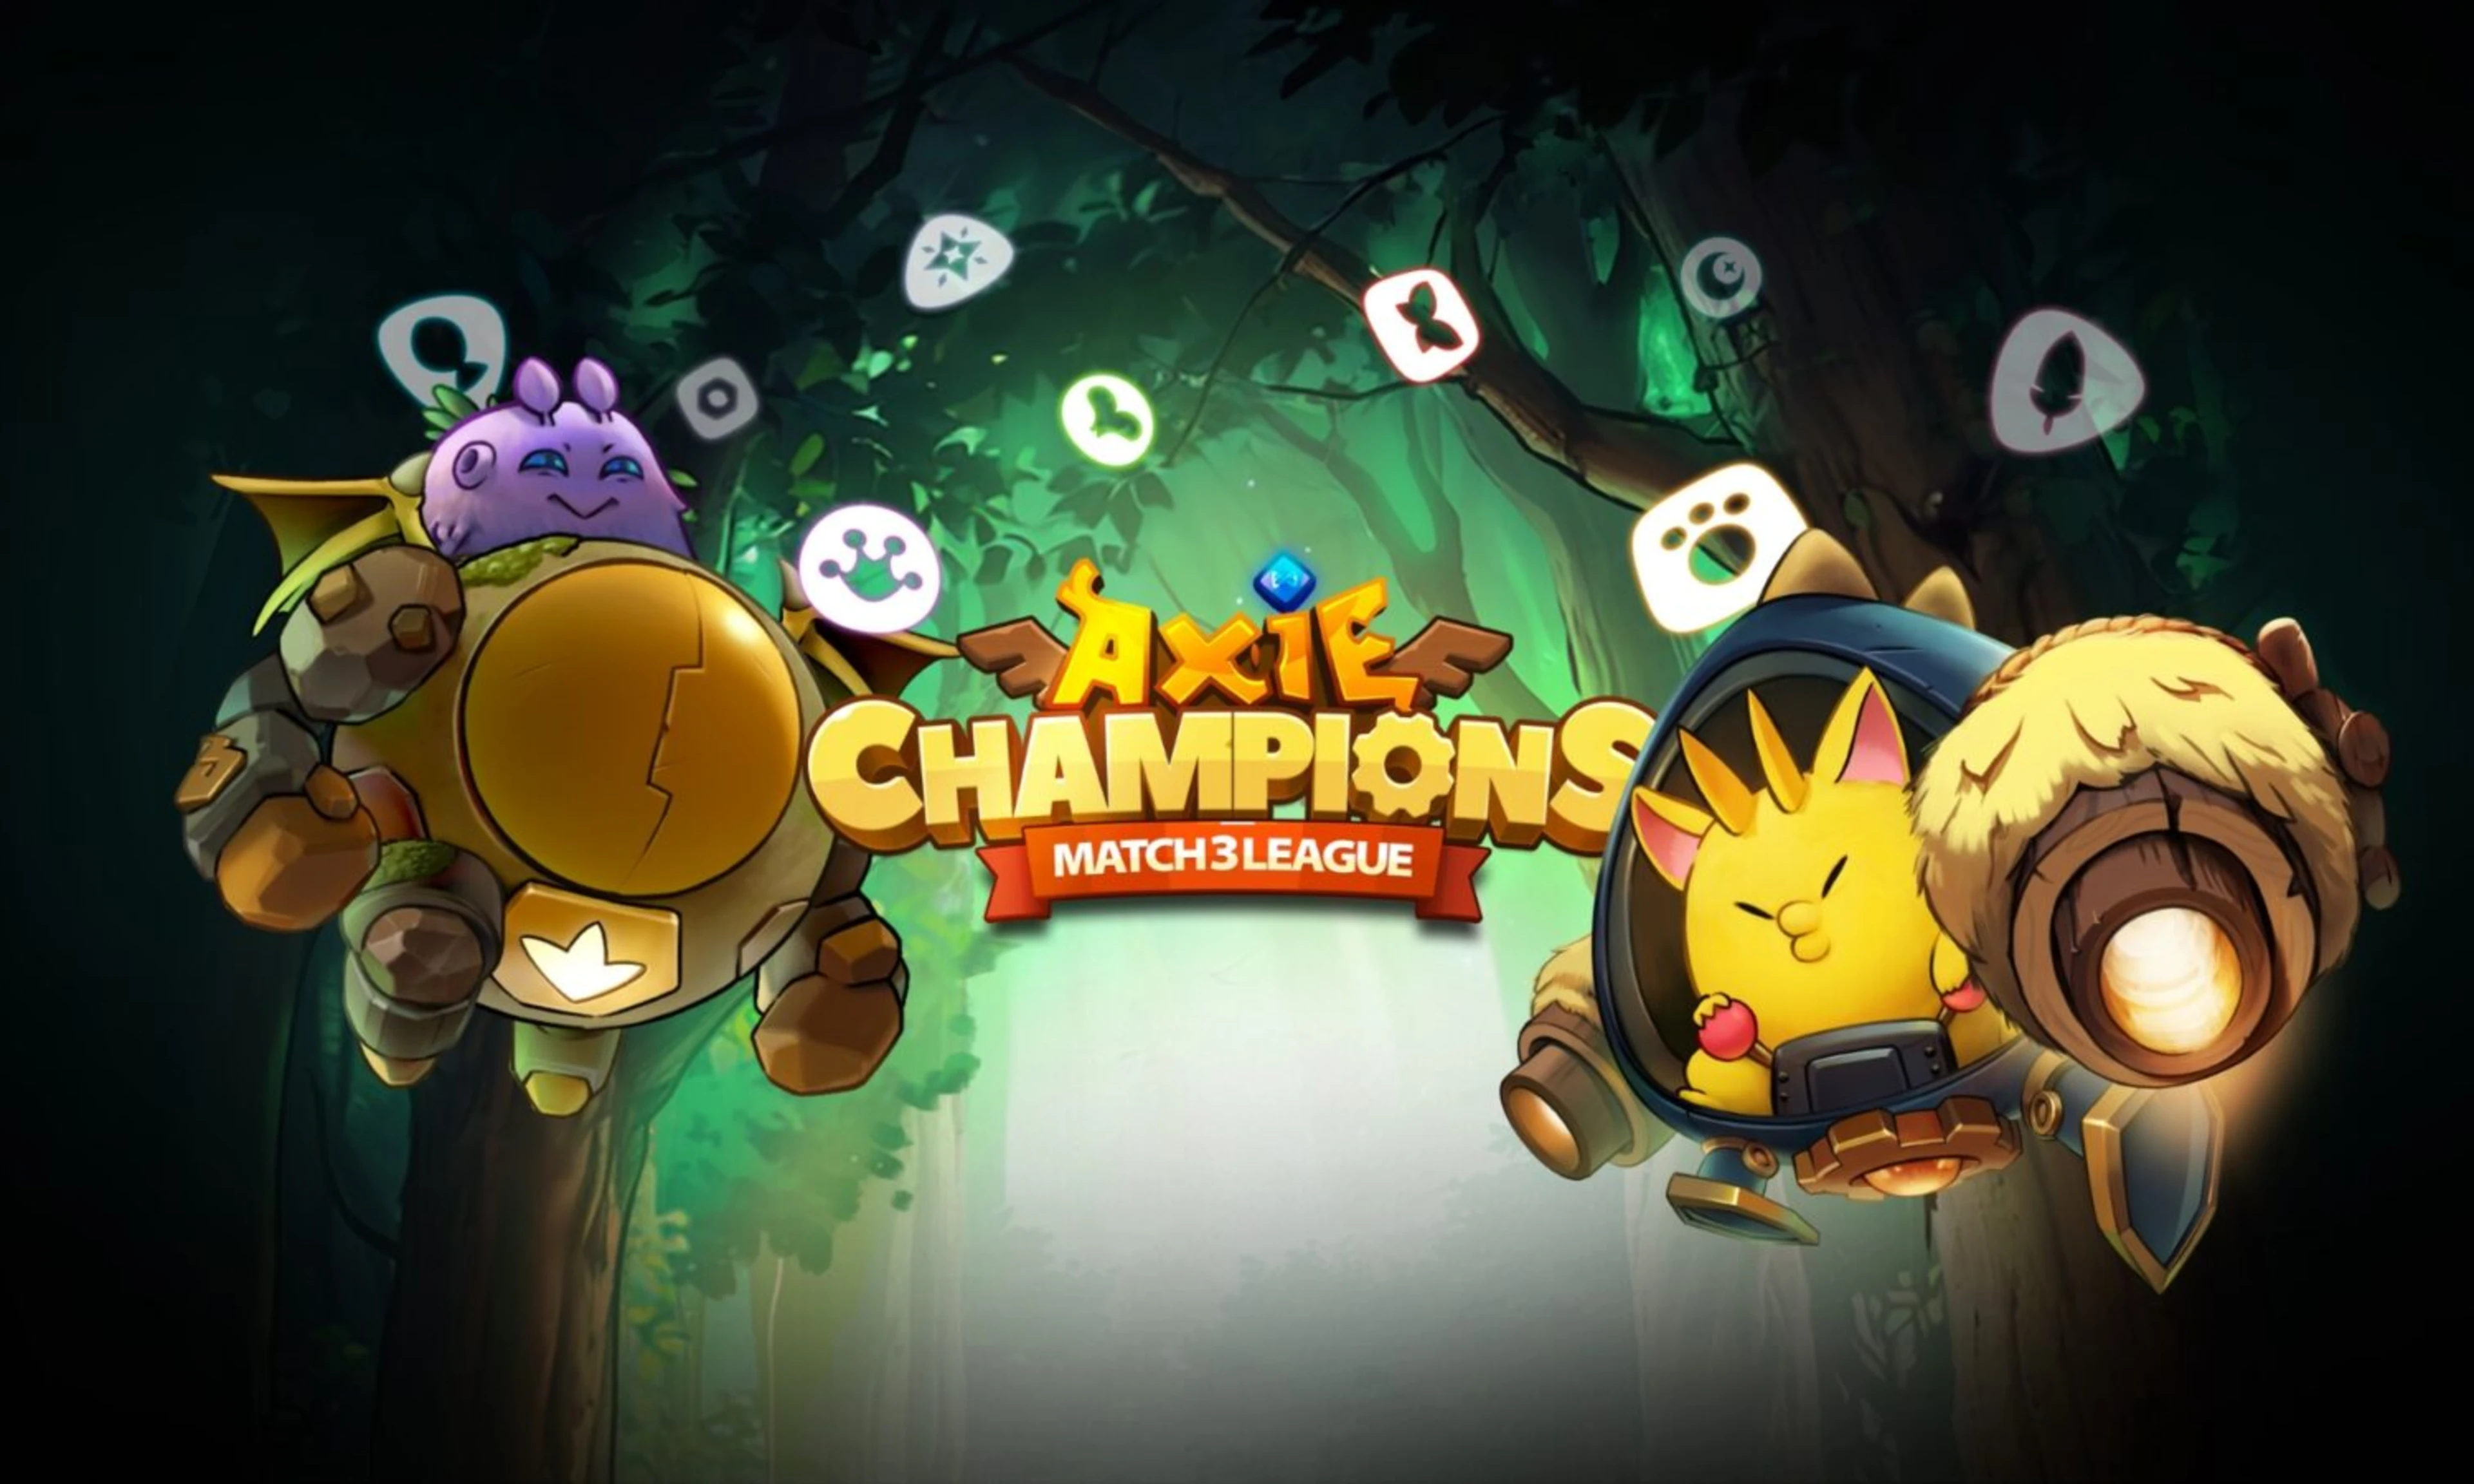 Axie Champions is now LIVE, Taking Mobile Gaming to New Heights with NFT Integration